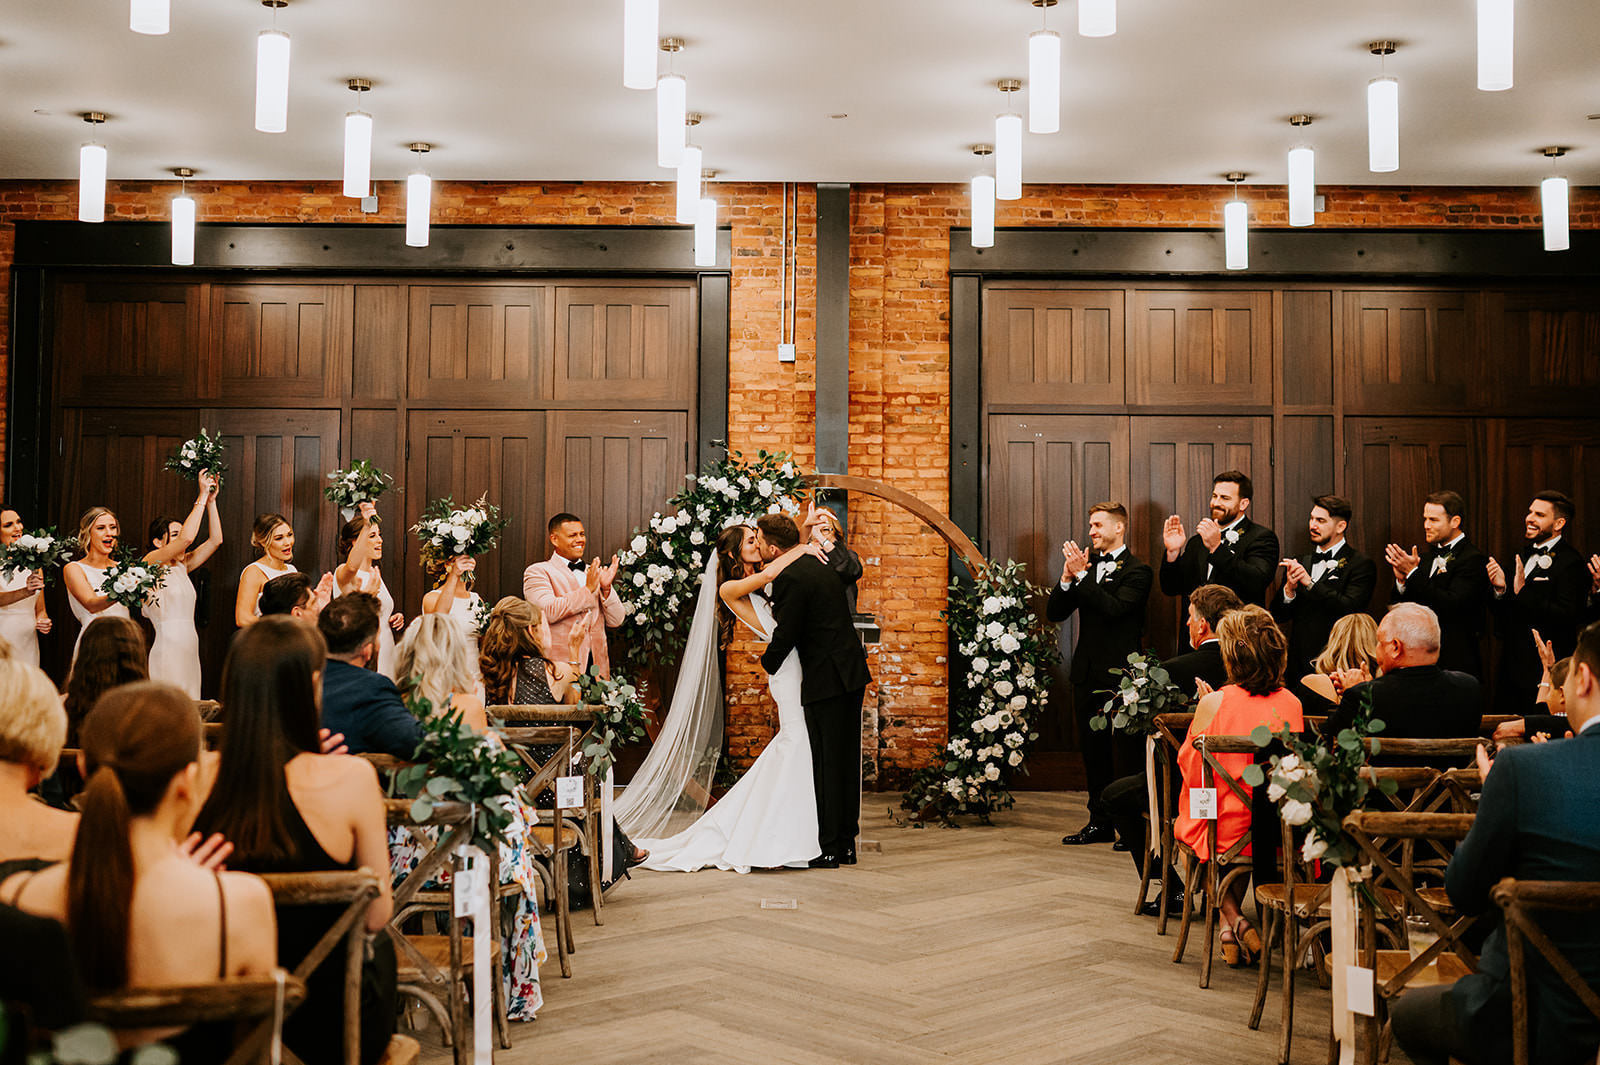 Bride and Groom First Kiss Wedding Portrait | Round Wooden Wedding Arch Ideas | Classic White Rose and Greenery Flower Arrangement Inspiration